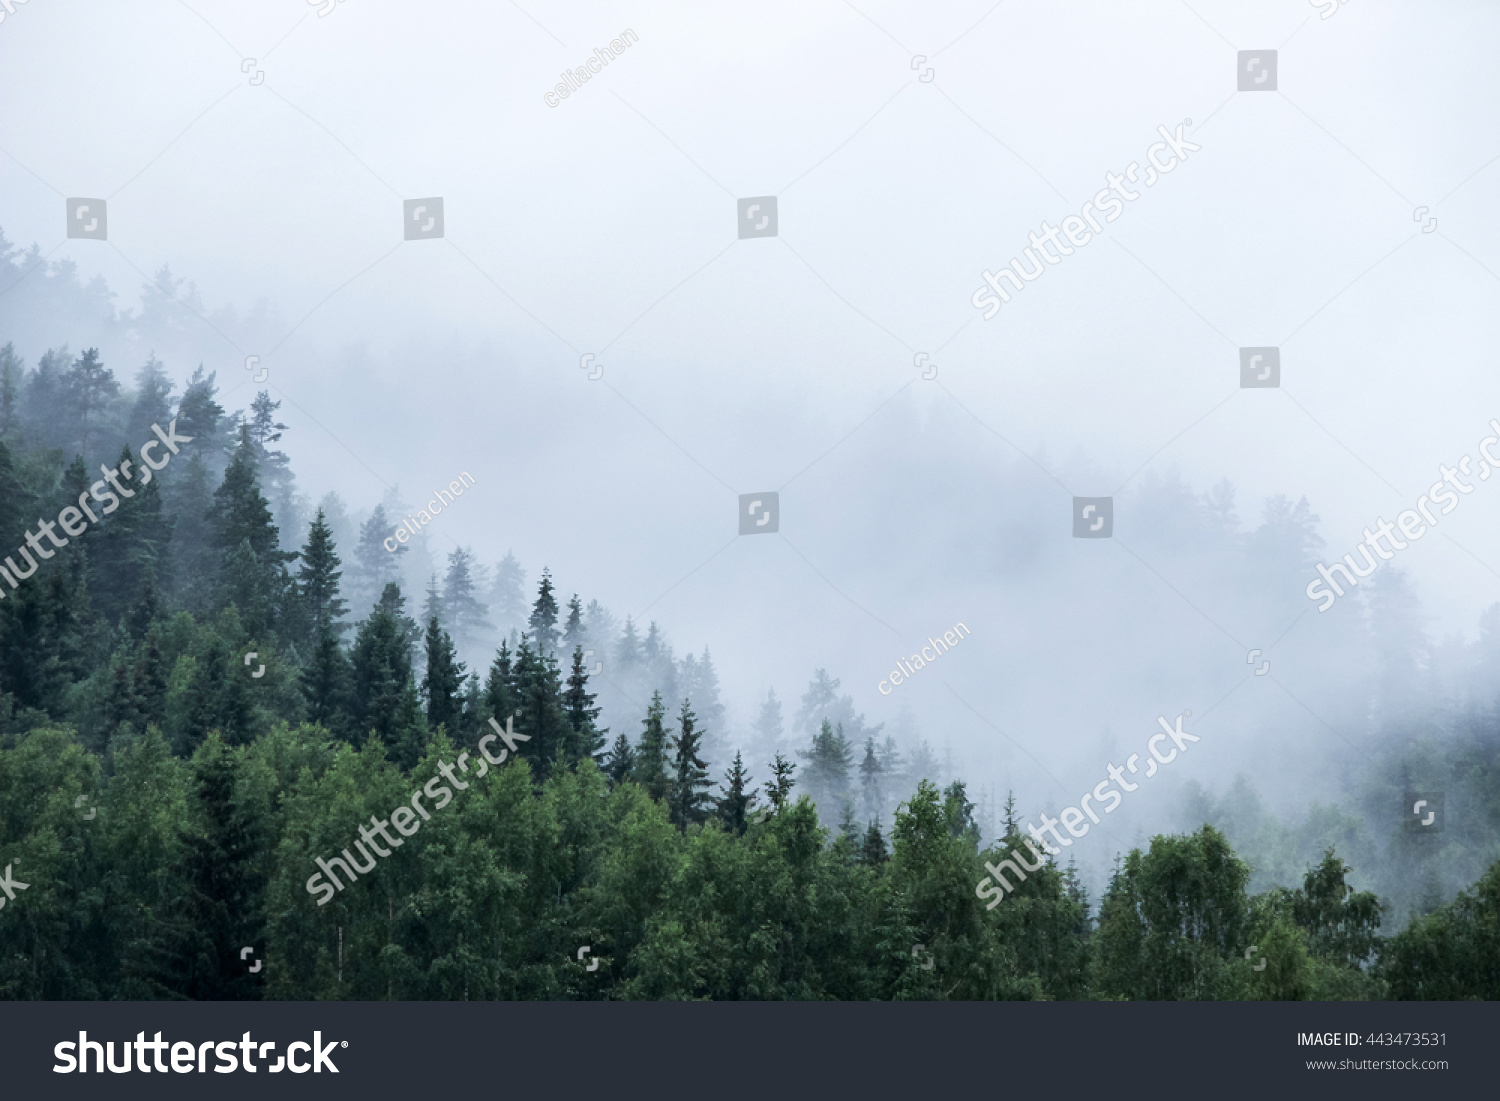 pine tree forest on mountain with mist #443473531